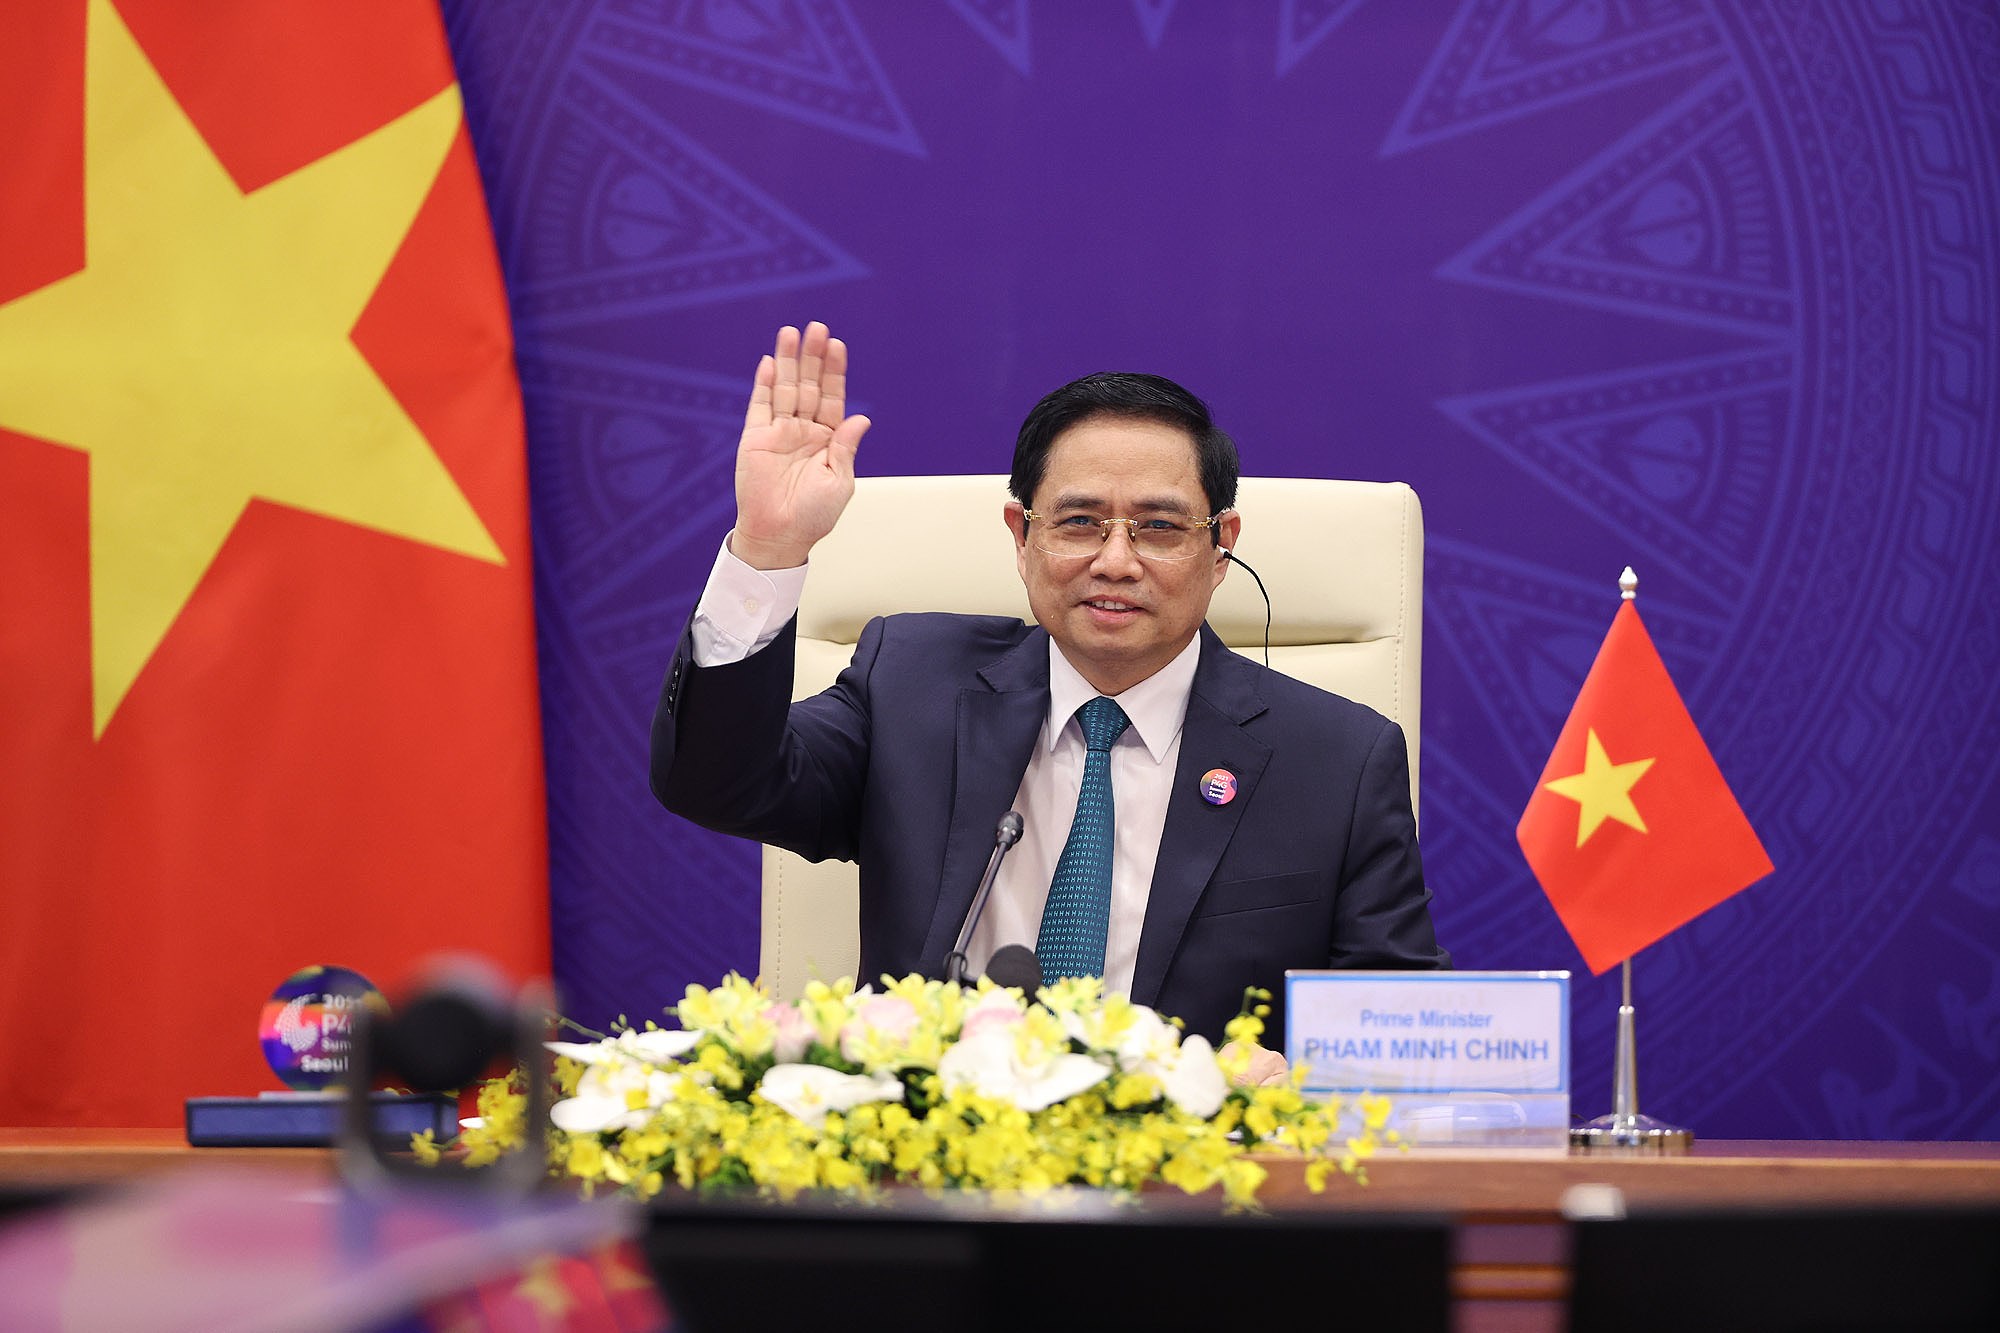 Prime Minister proposes six solutions at second P4G Summit hinh anh 2